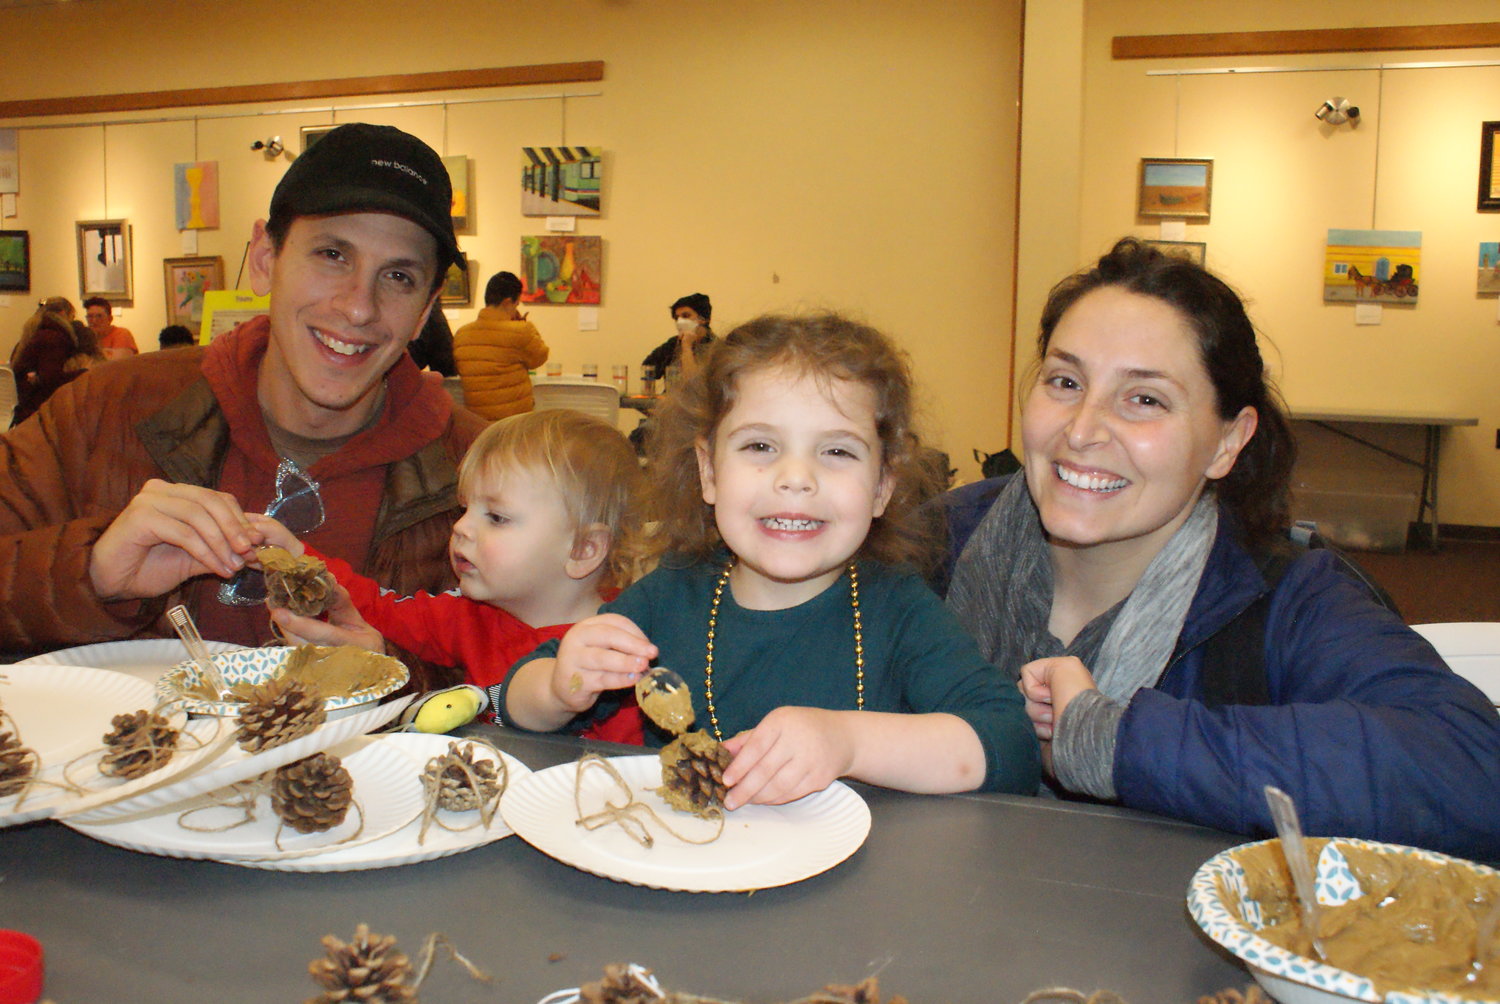 BIRD FEEDERS: The Durante family, Devan, Miles age 1, Marcella age 3 and Lauren, makes bird feeders out of pine cones, peanut butter and bird seed at Winterfest at the Central Library.